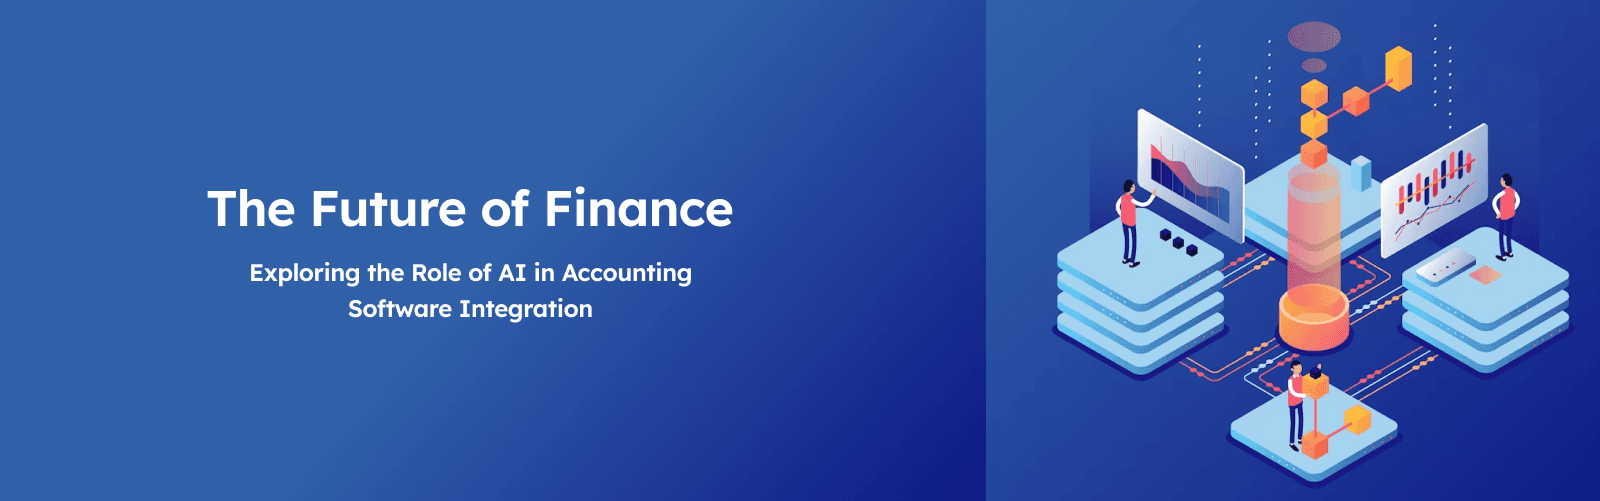 The Future of Finance: Exploring the Role of AI in Accounting Software Integration